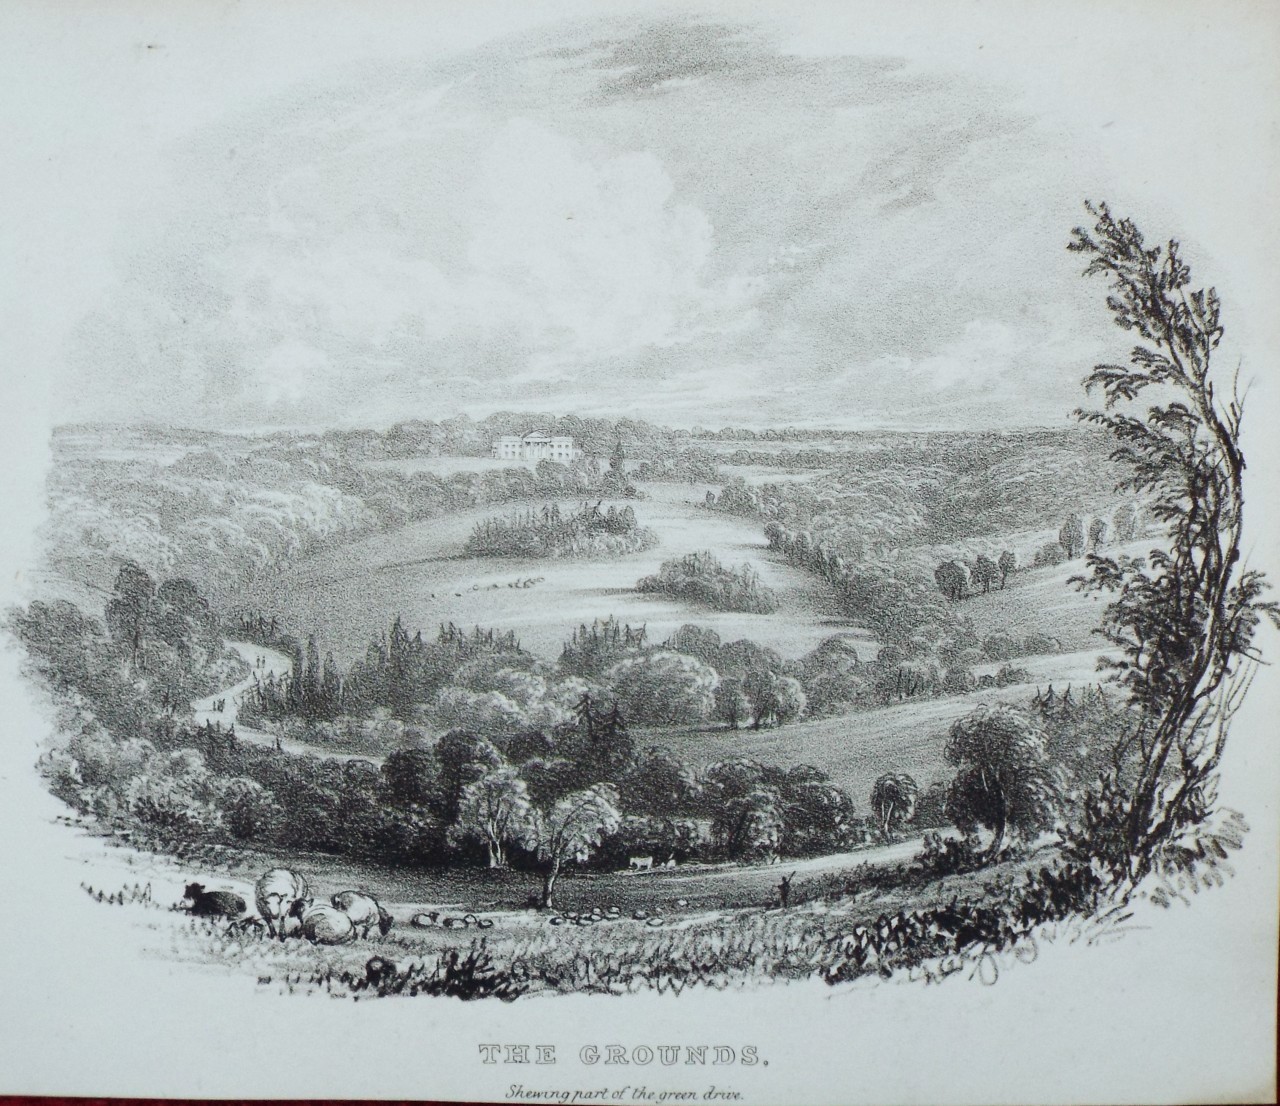 Lithograph - (Buckland House) The Grounds, Showing part of the green drive.